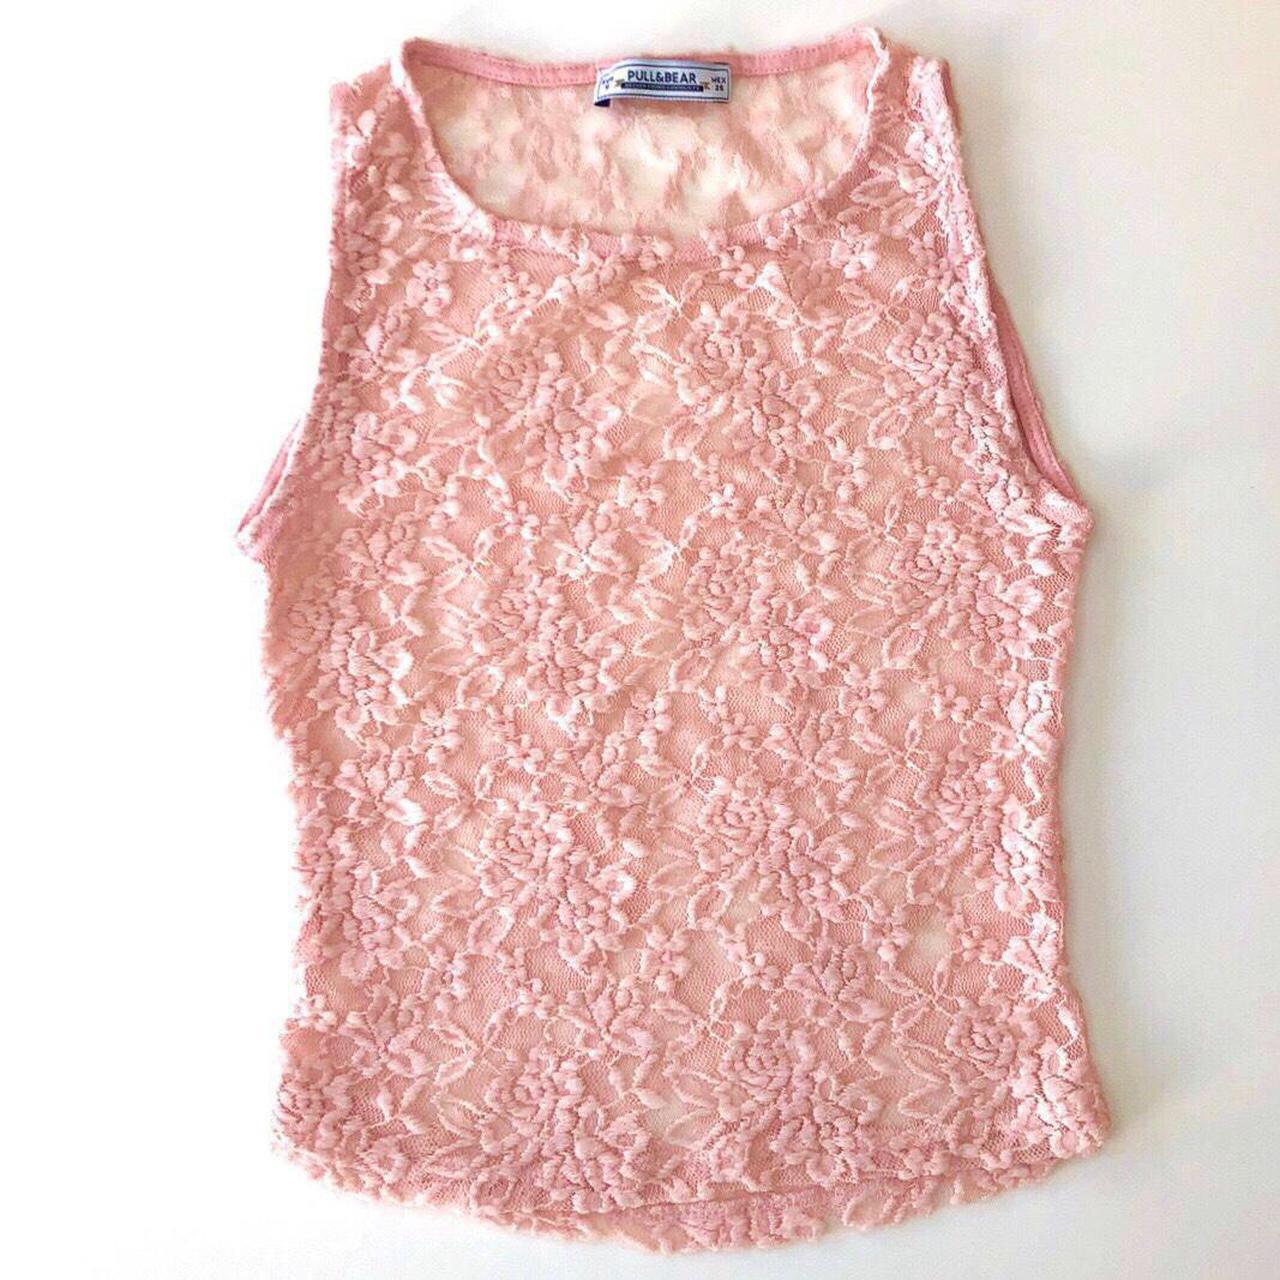 Product Image 1 - Adorable fairycore lace top 🥺🌸

Amazing